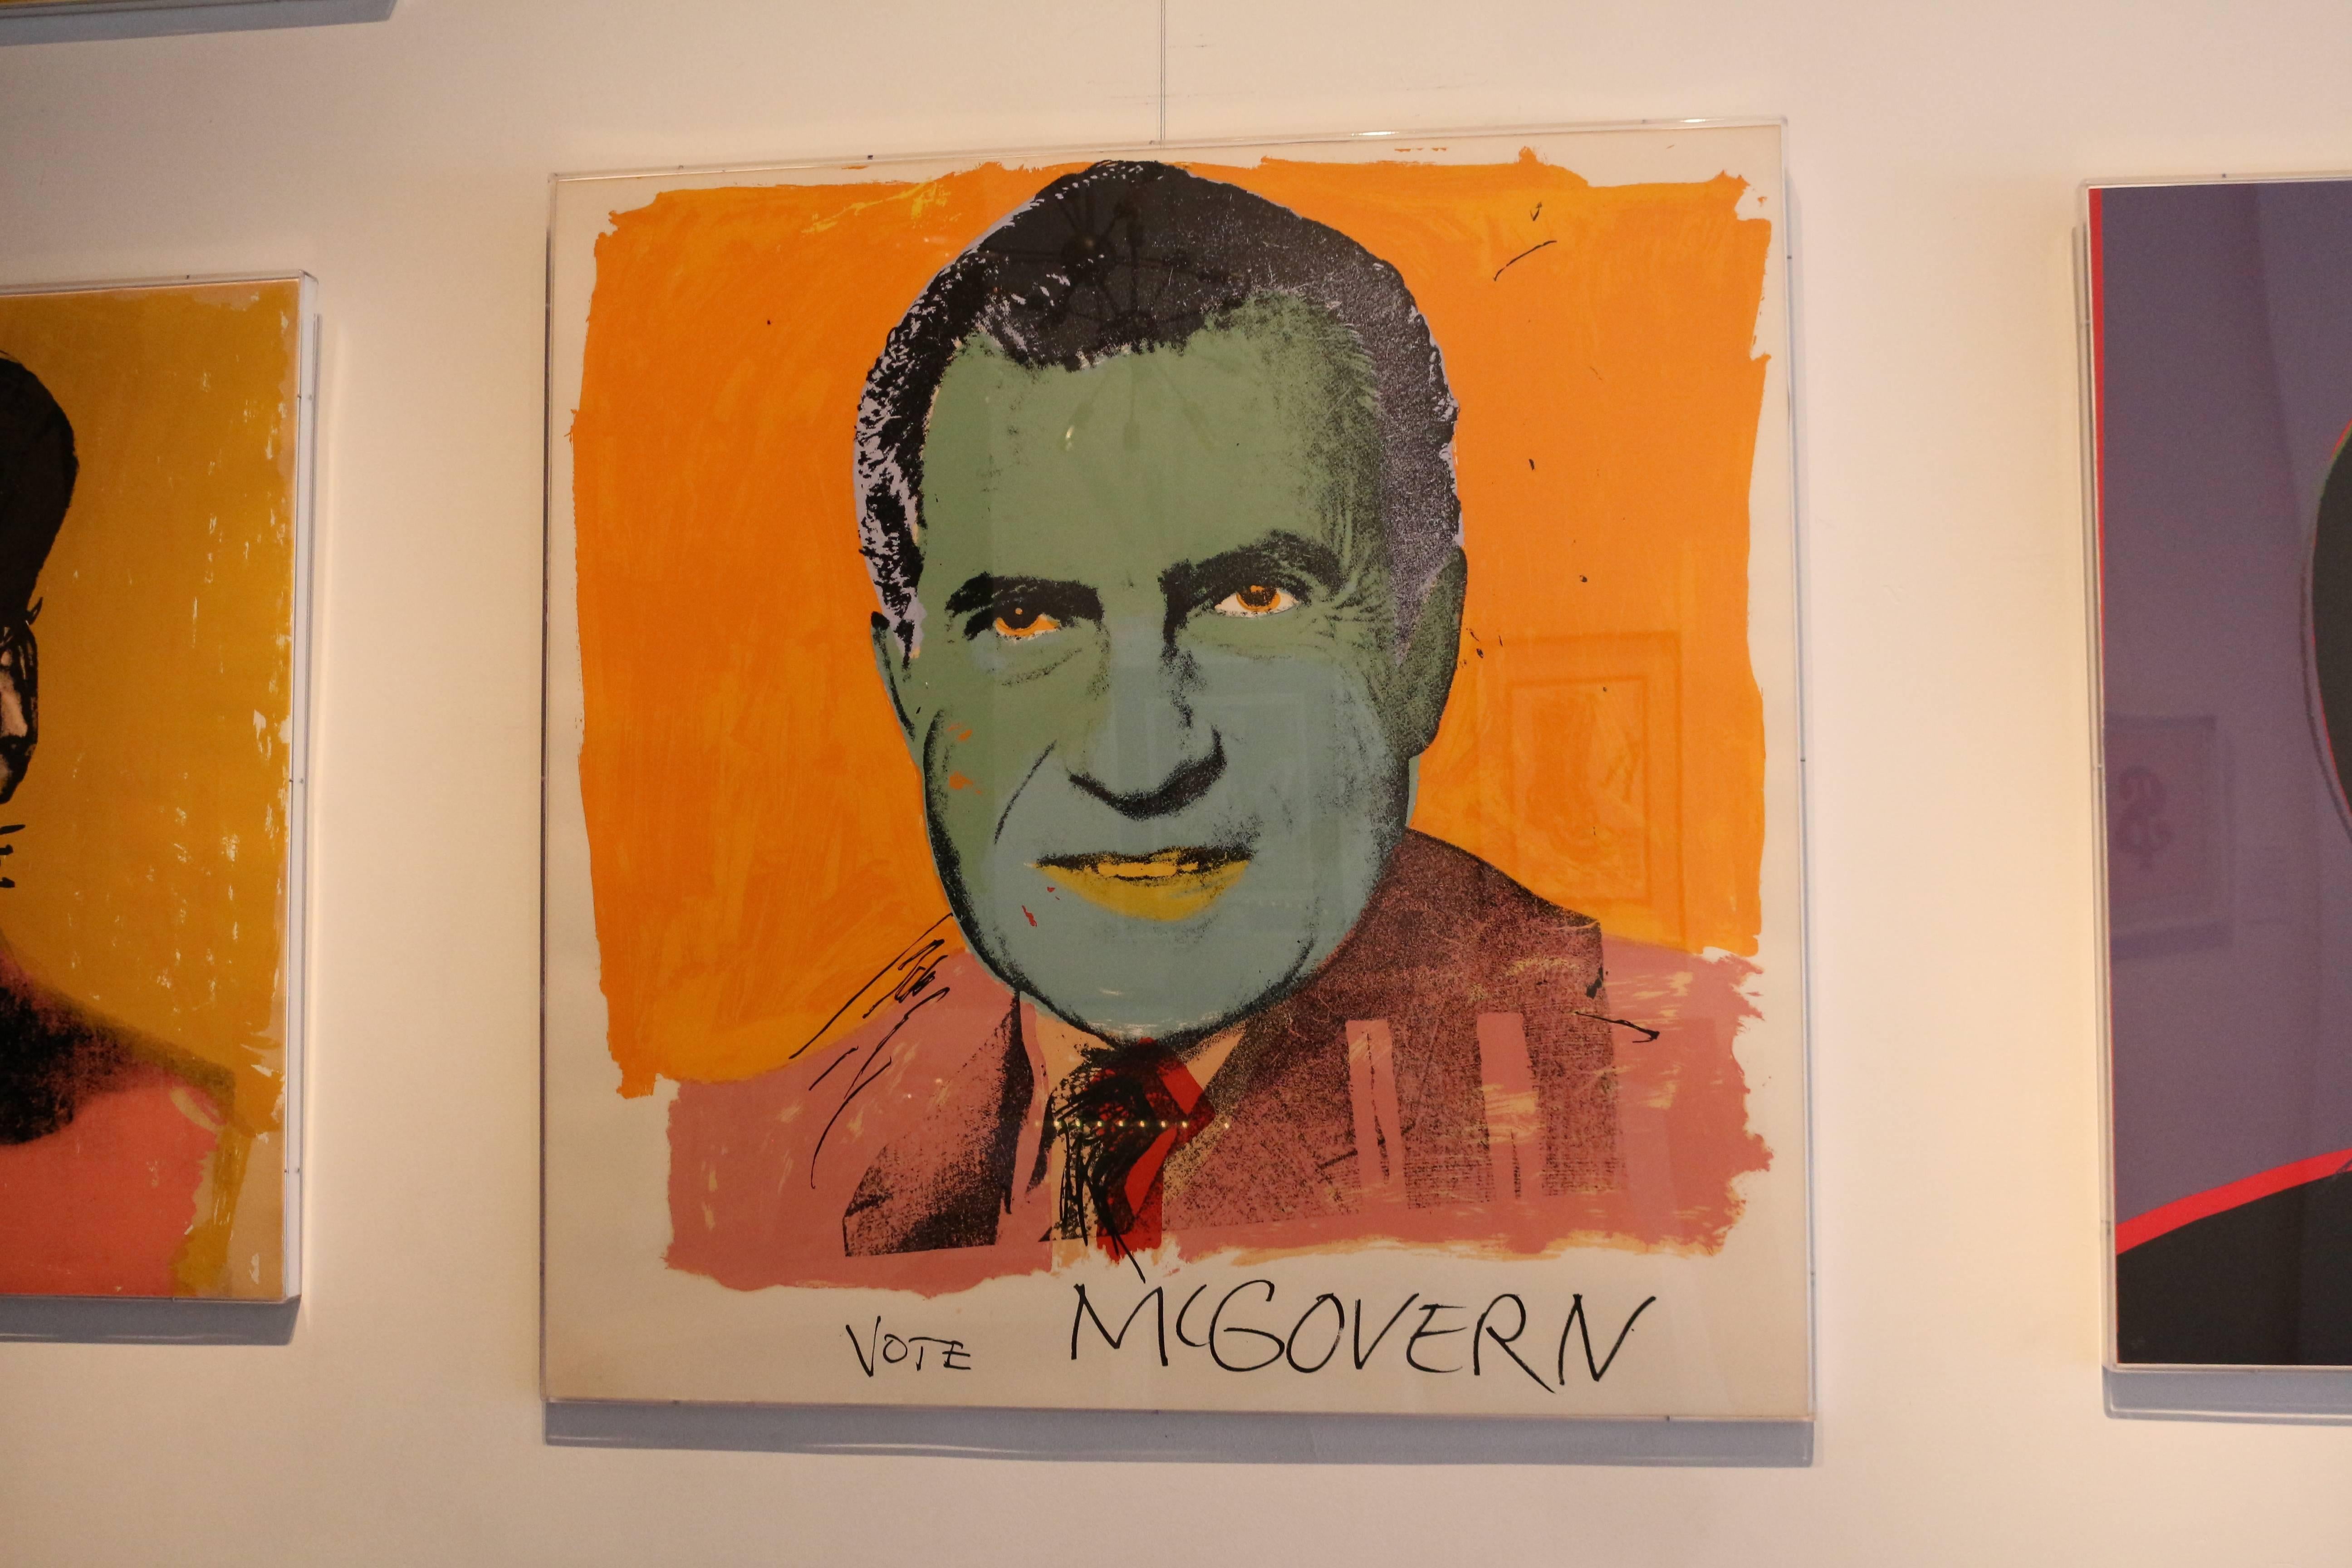 Vote McGovern (FS II.84) - Print by Andy Warhol